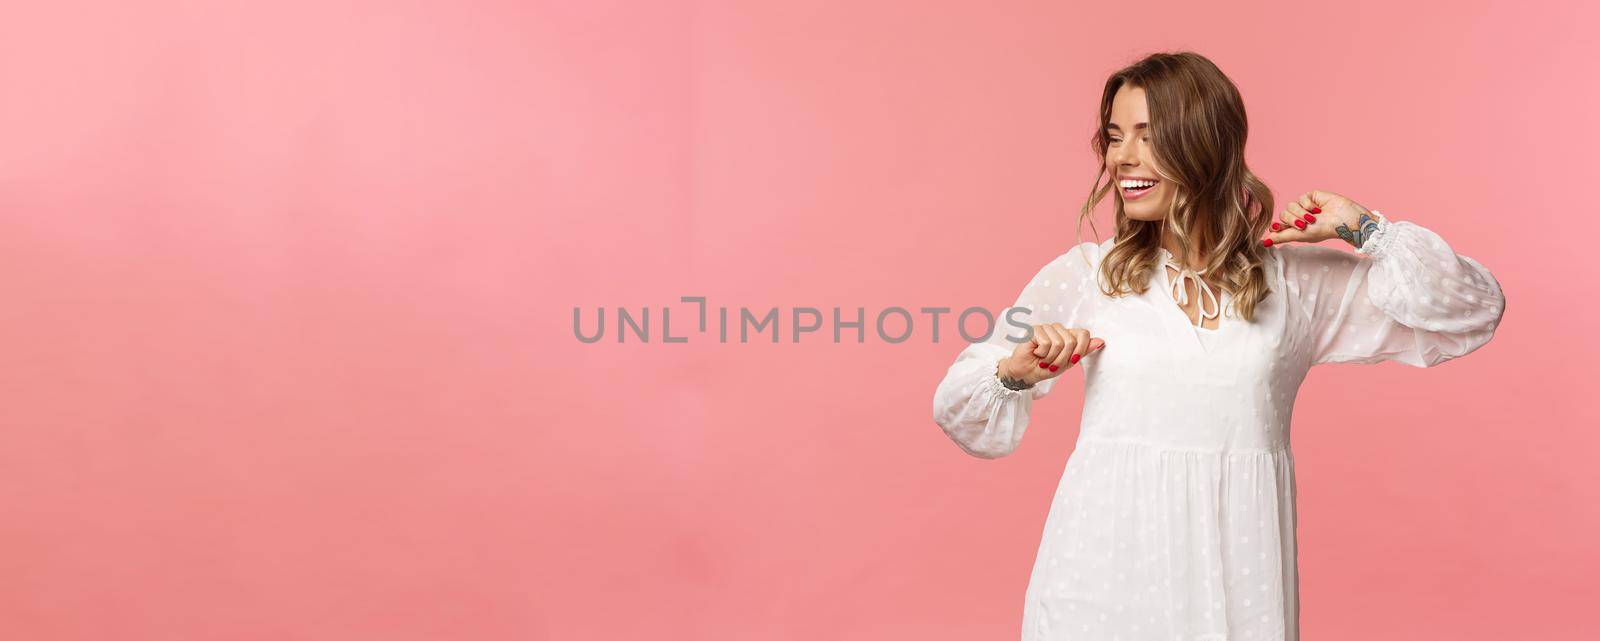 Beauty, fashion and women concept. Tender and carefree pretty young girl enjoying spring time, wearing white dress, dancing and looking away with beaming smile having fun, pink background.